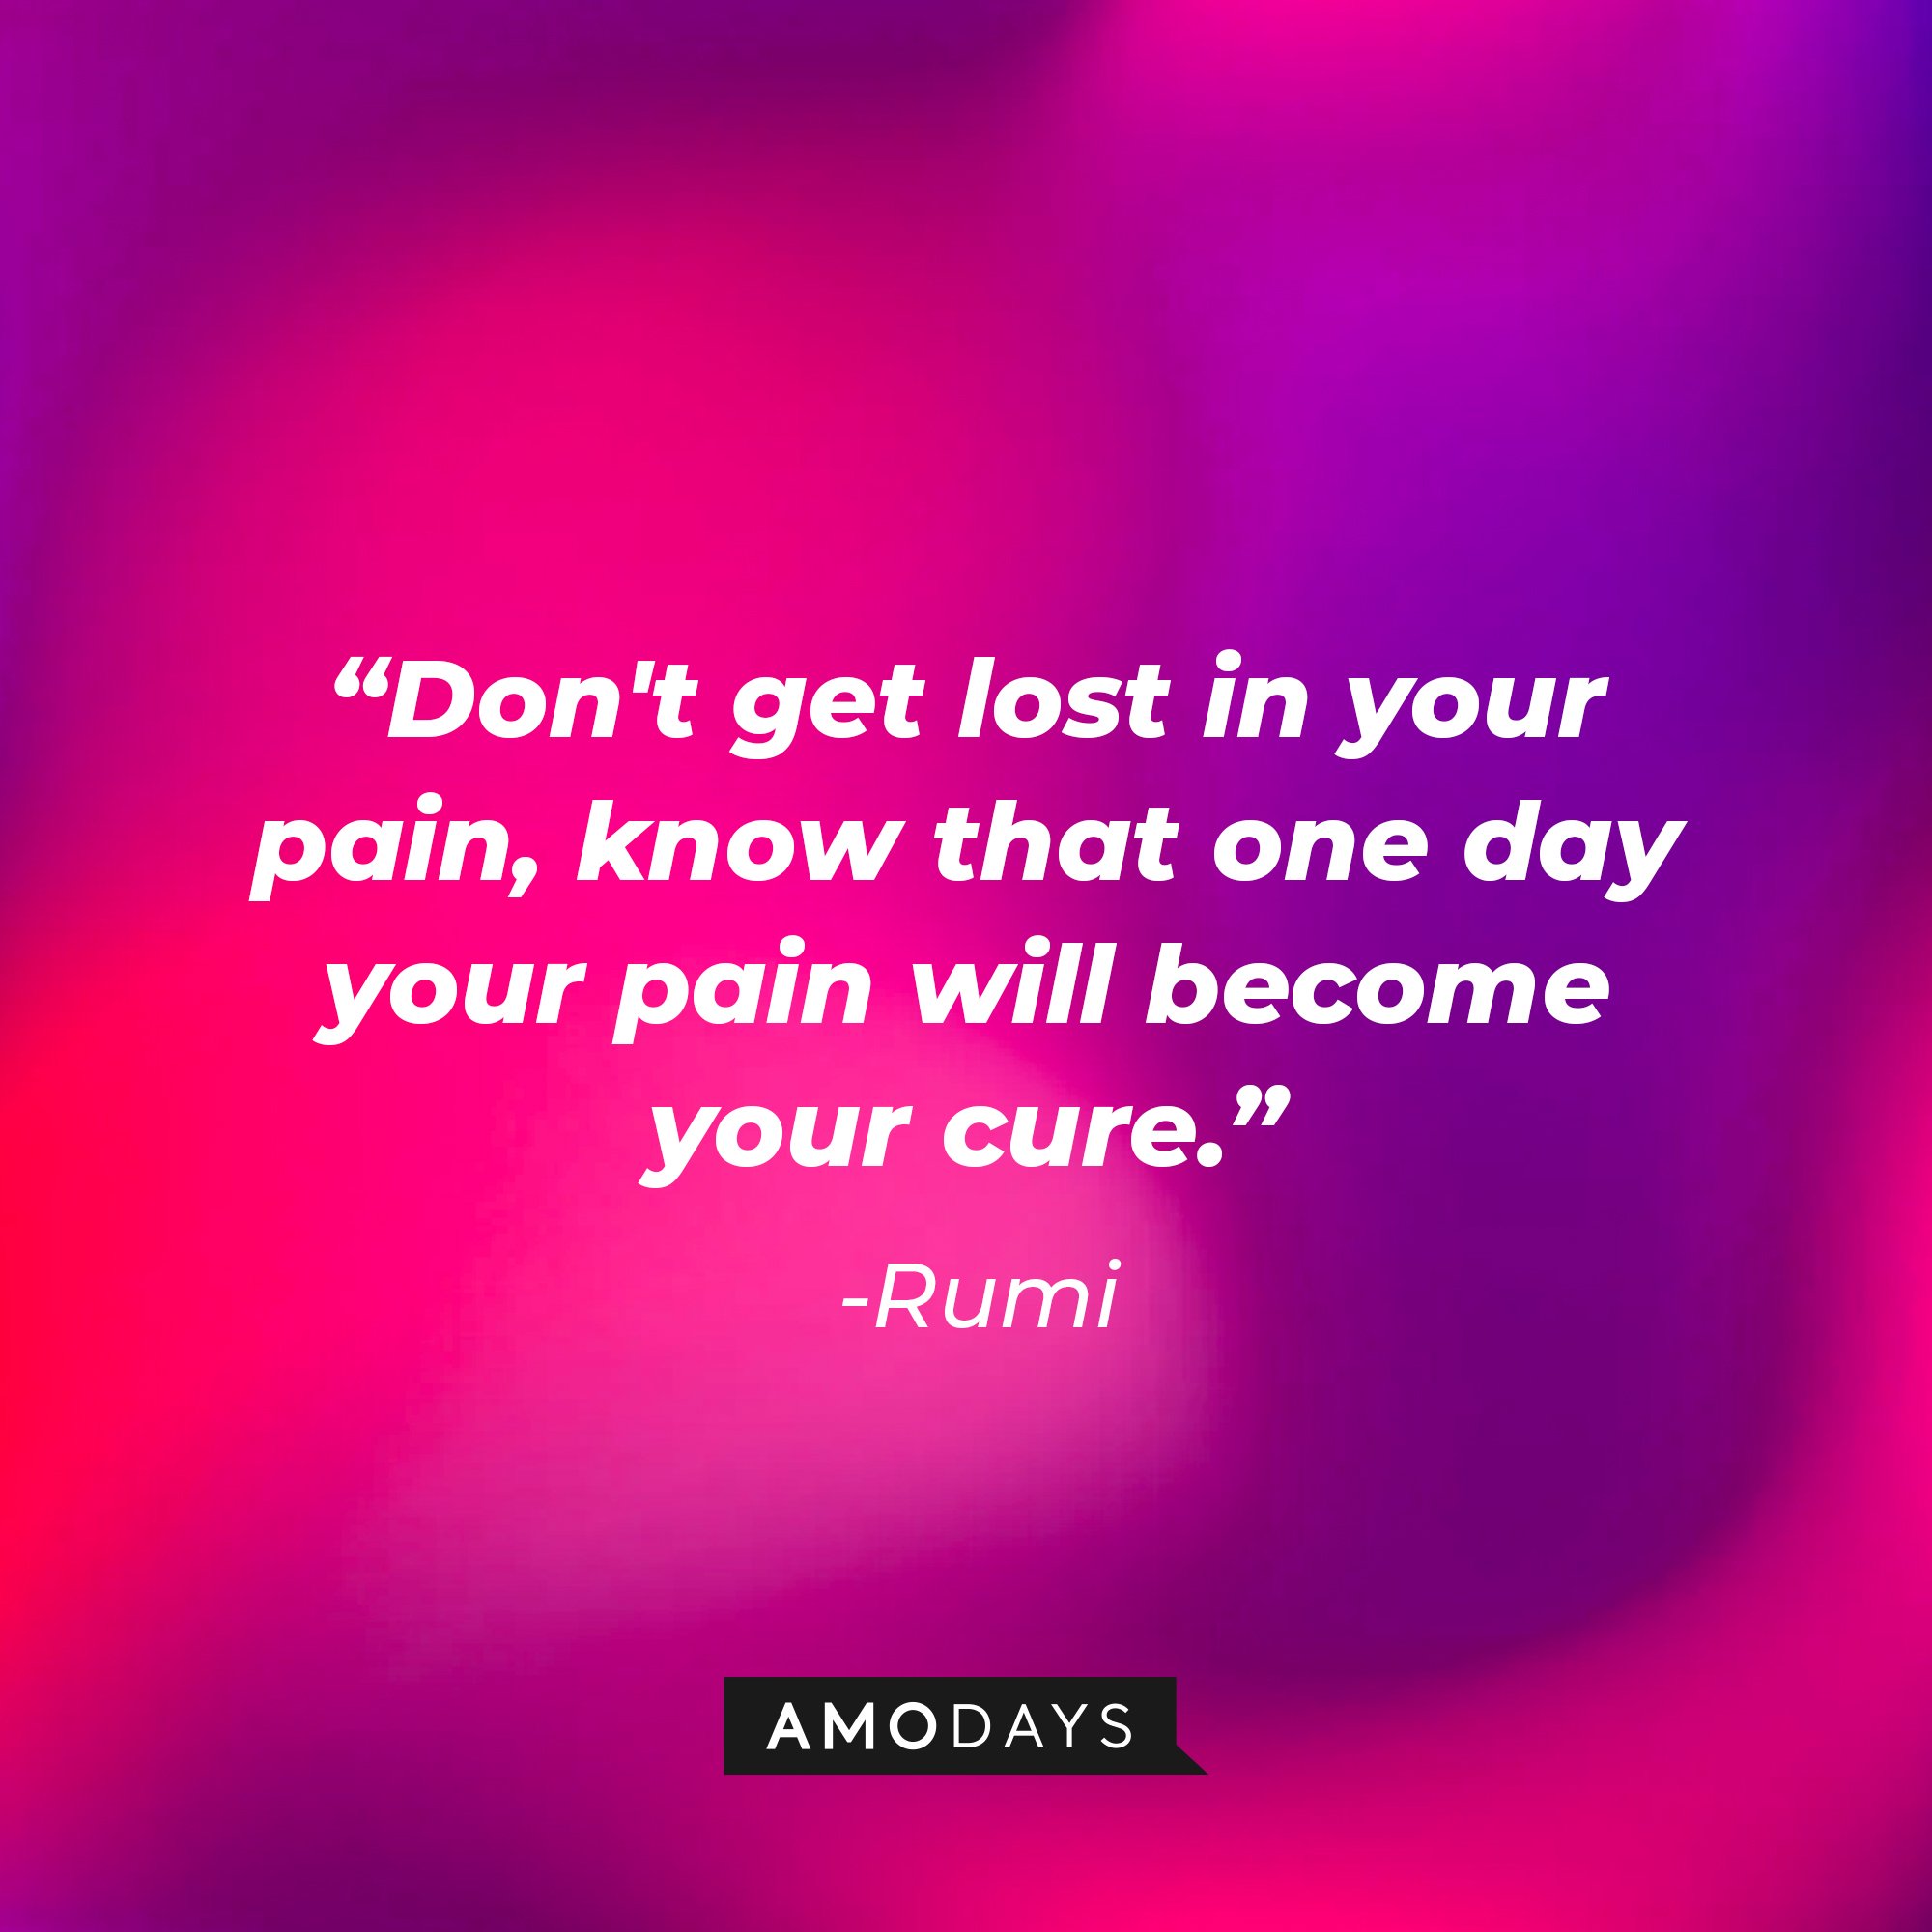 Rumi's quote: "Don't get lost in your pain, know that one day your pain will become your cure." | Image: AmoDays